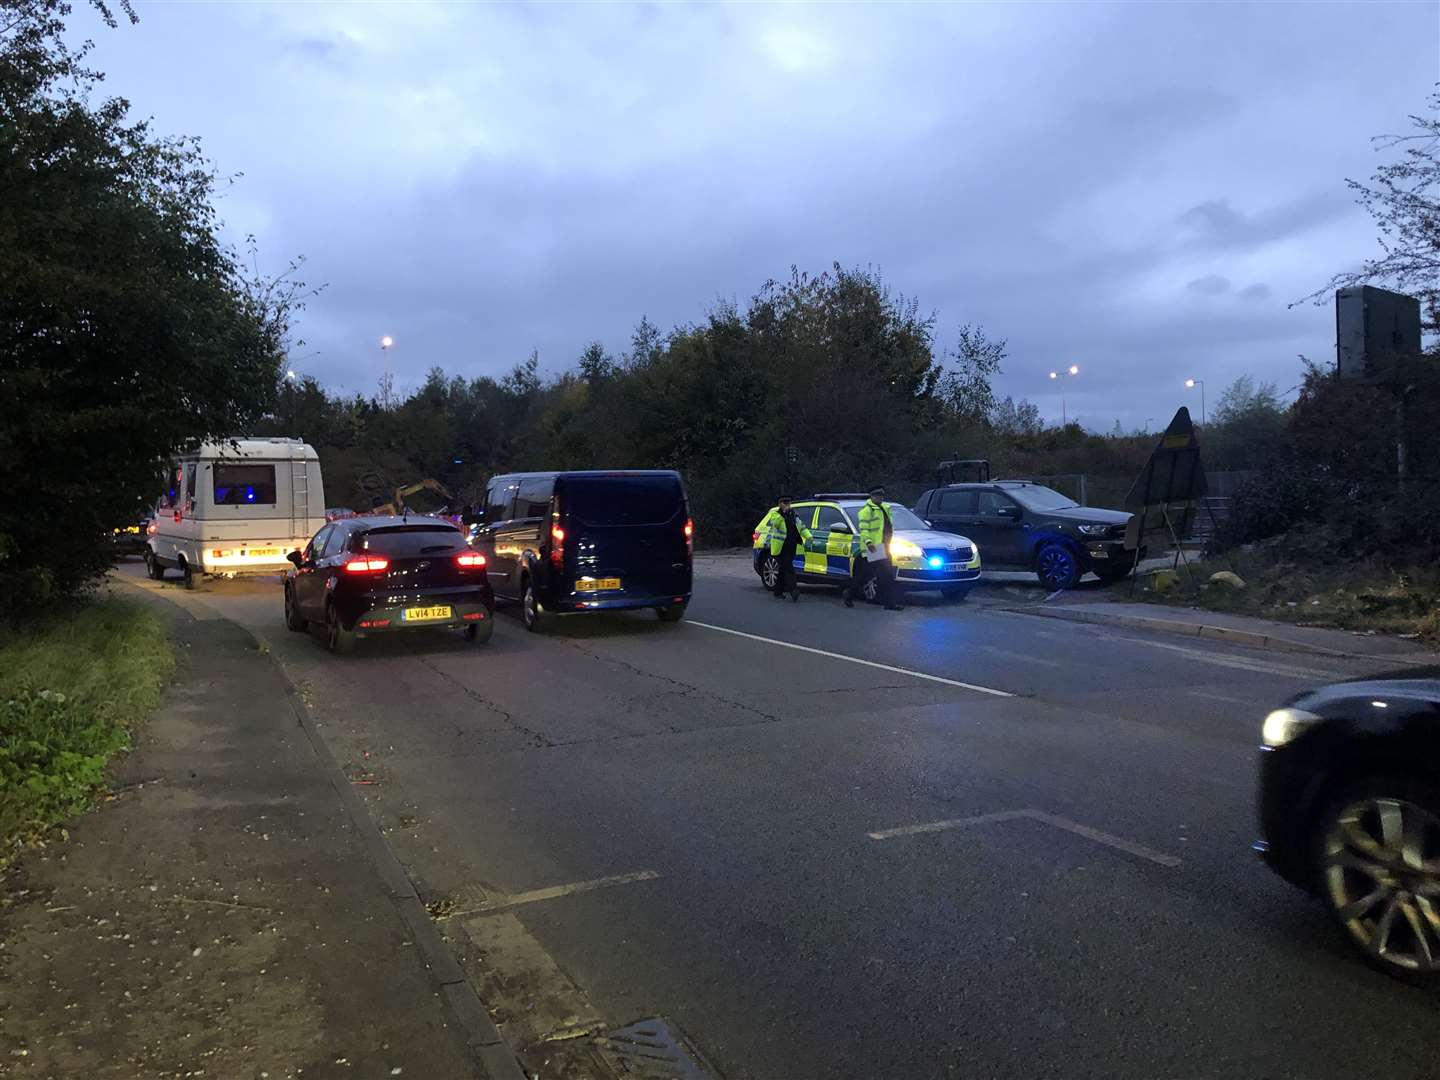 Police are in attendance at an incident on Wrotham Road, off the A2 near Gravesend